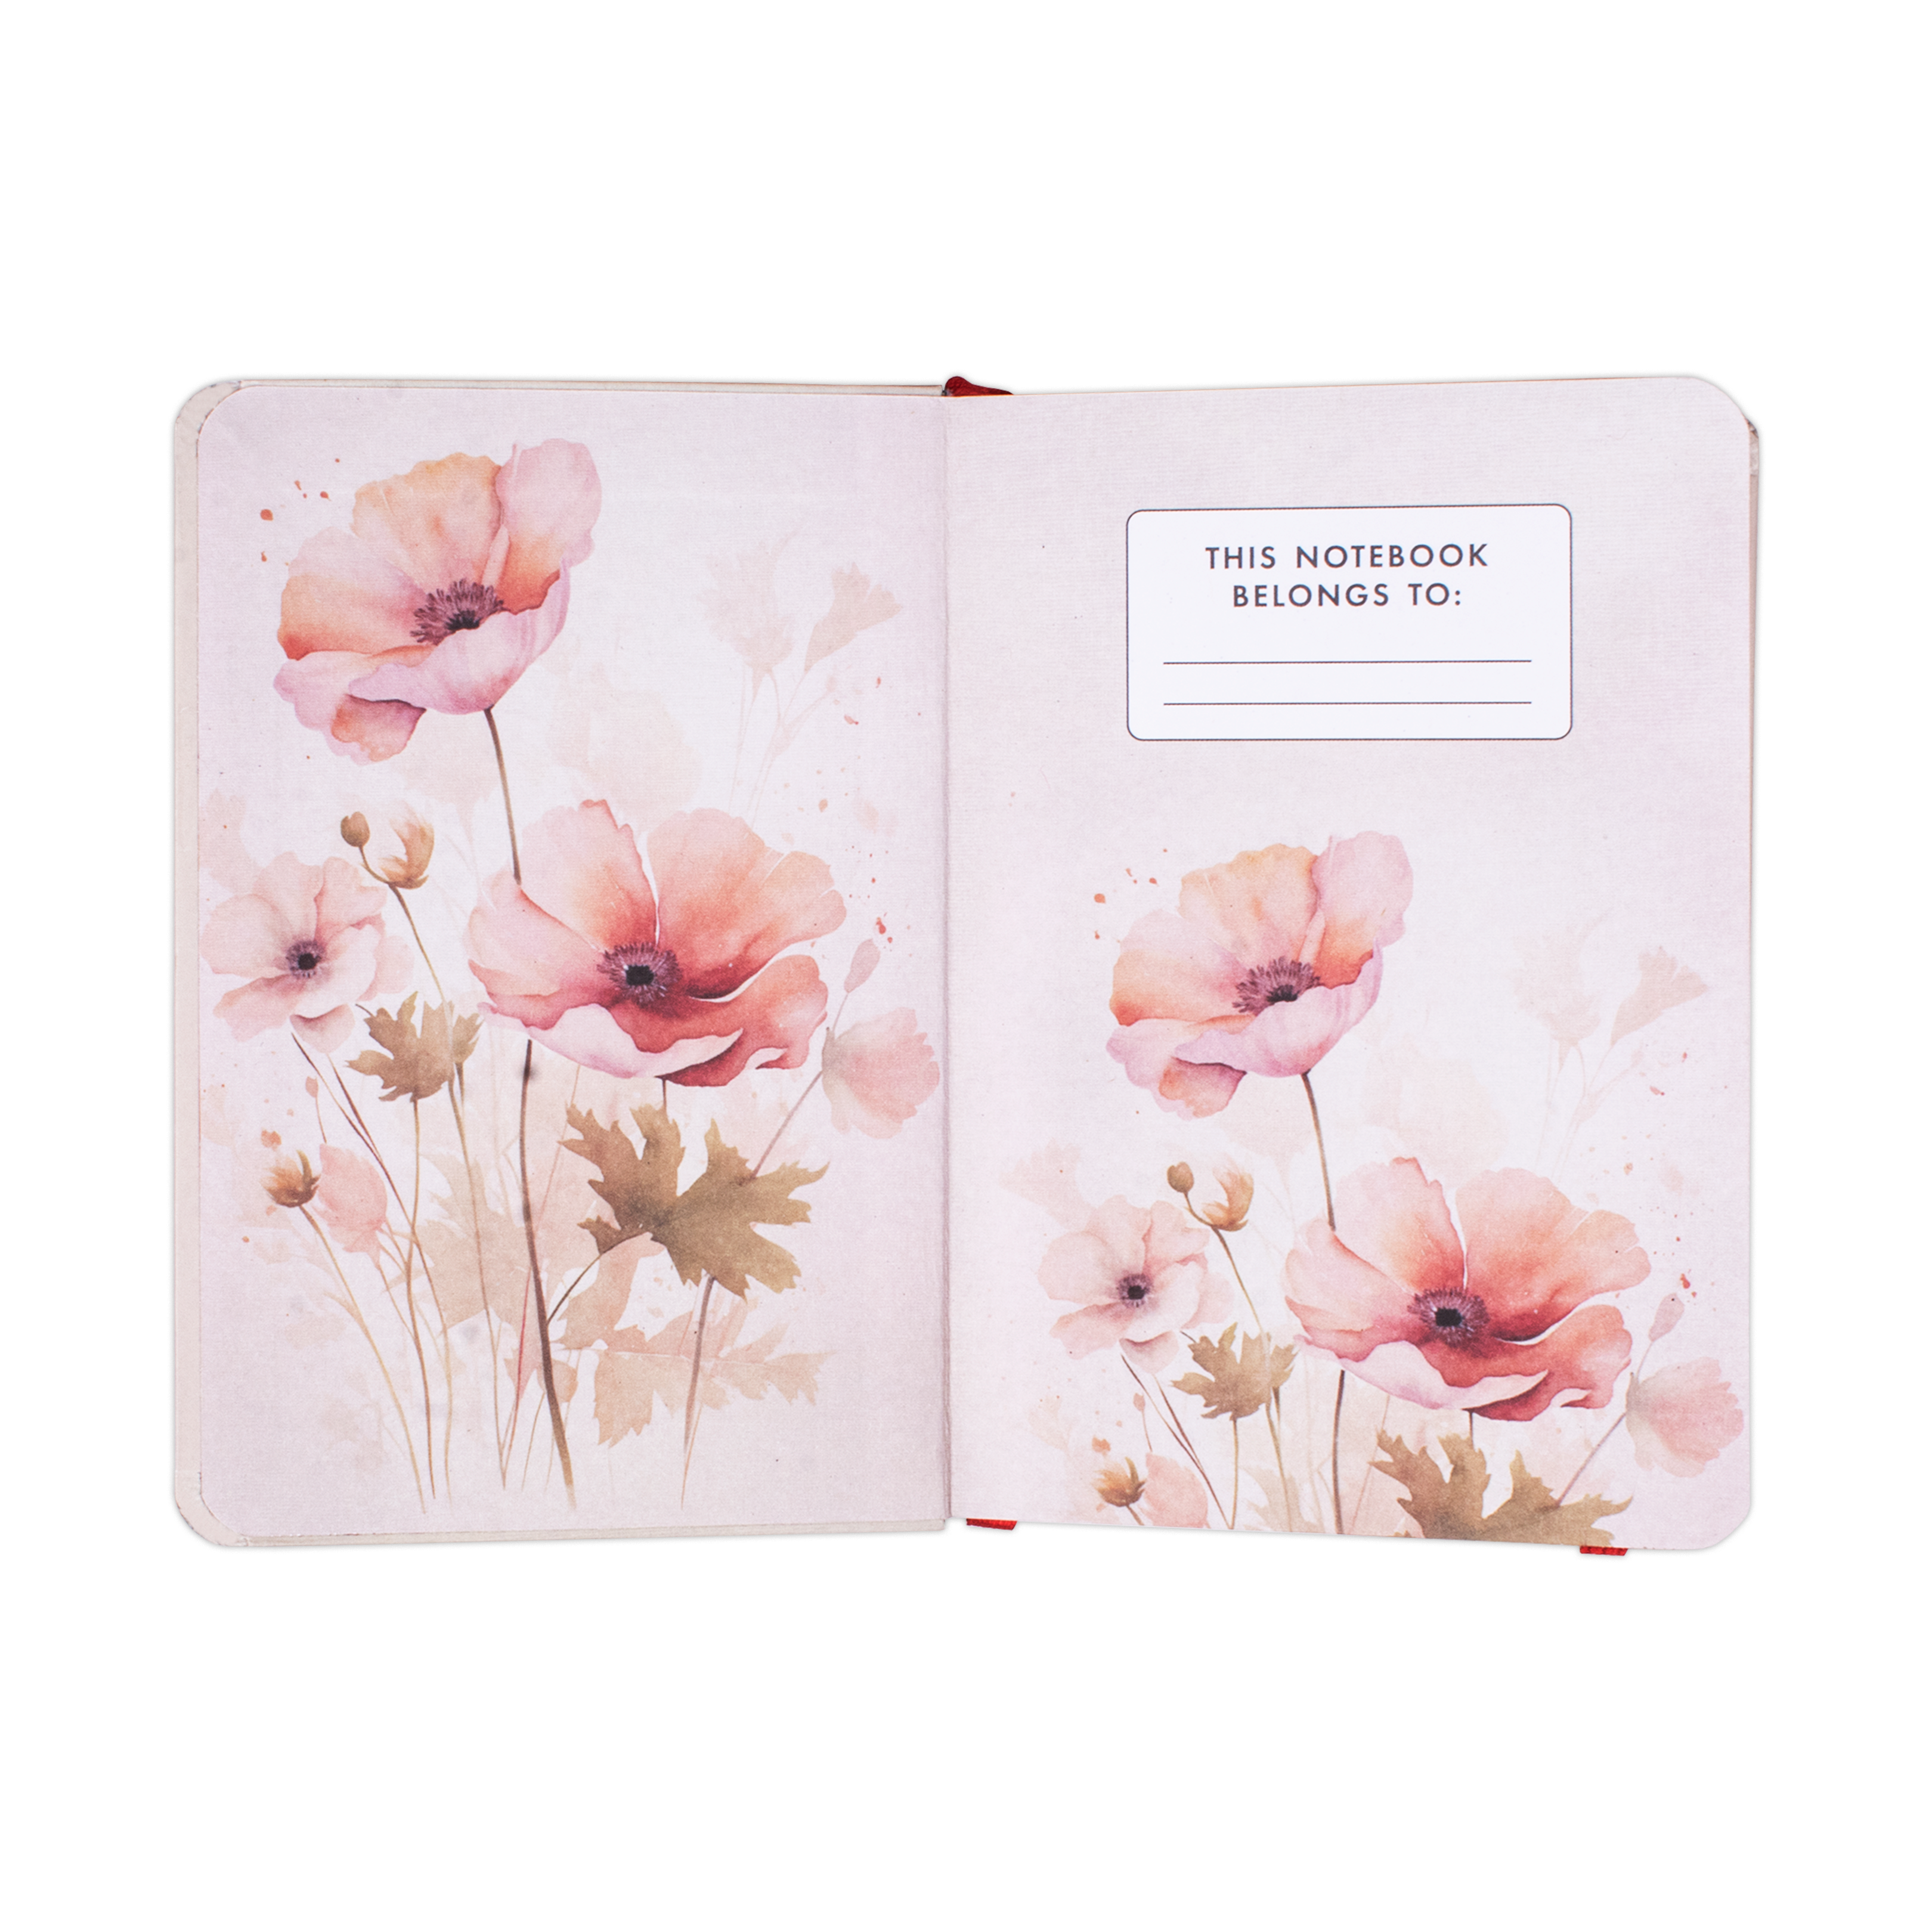 Hardbound Ruled Notebook Wildflower Edge Printed With Elastic Band A6 192pages 100gsm